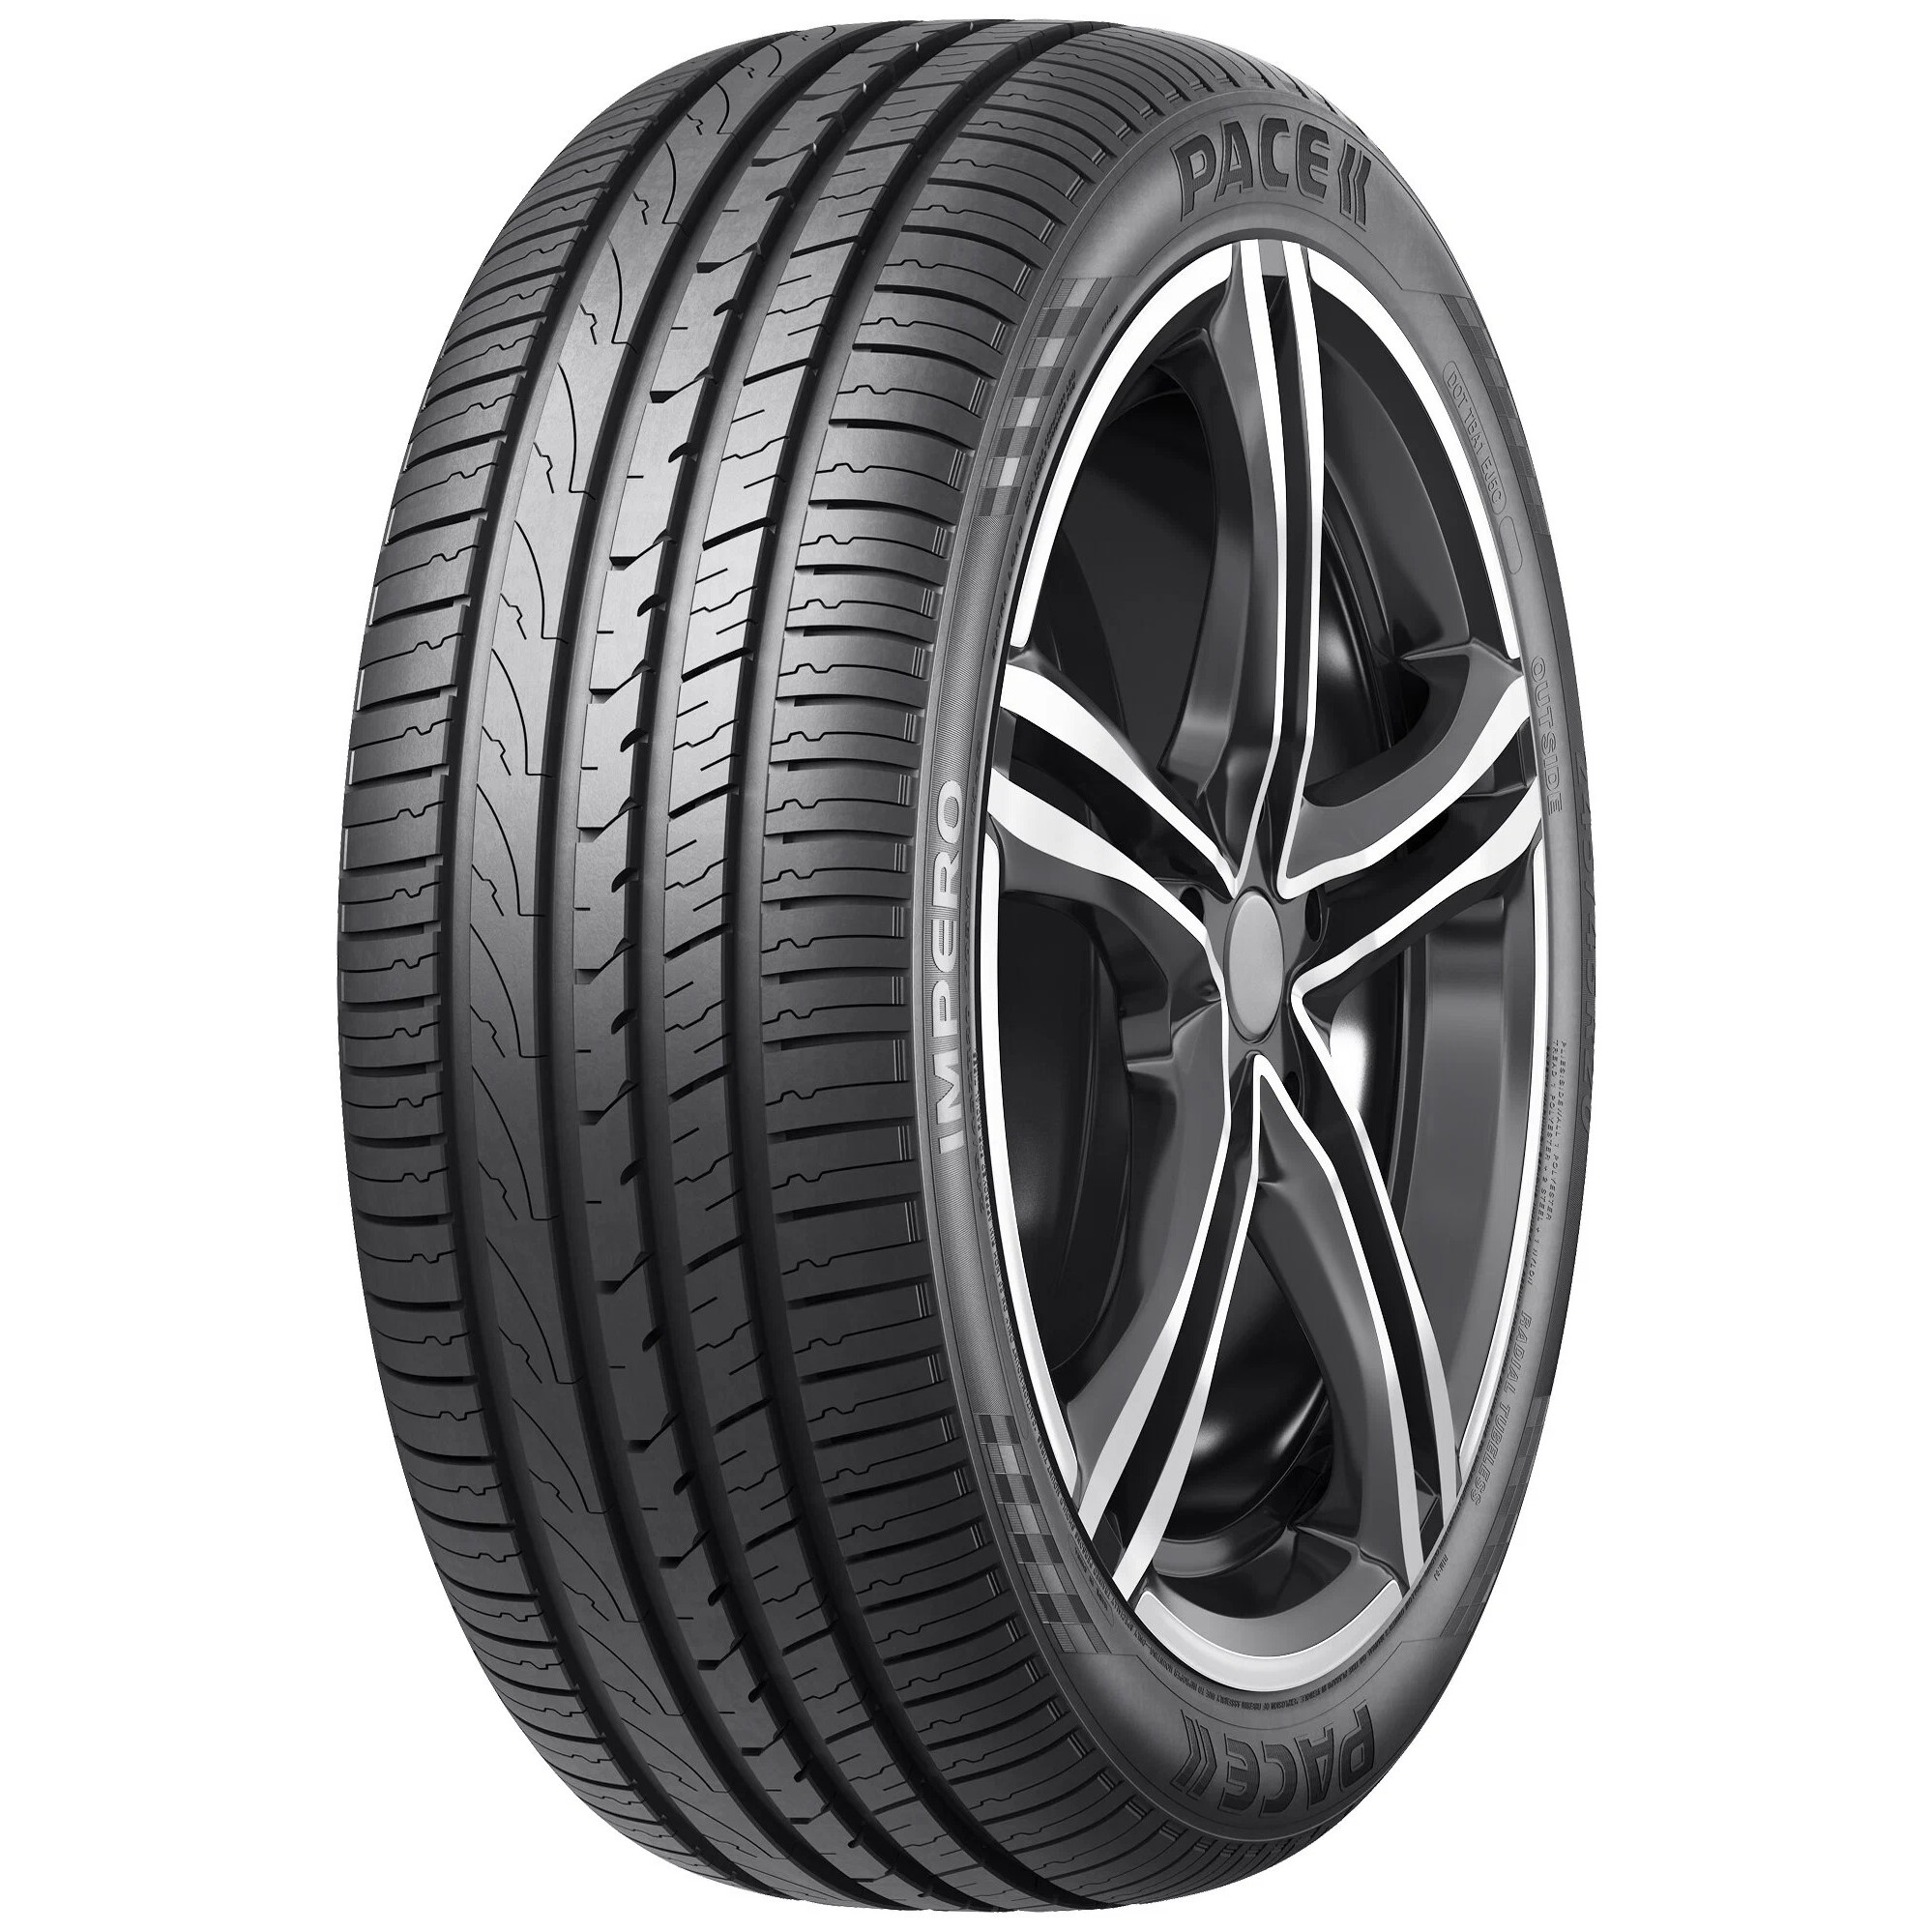 275/40 R20 Pace Impero 106W XL